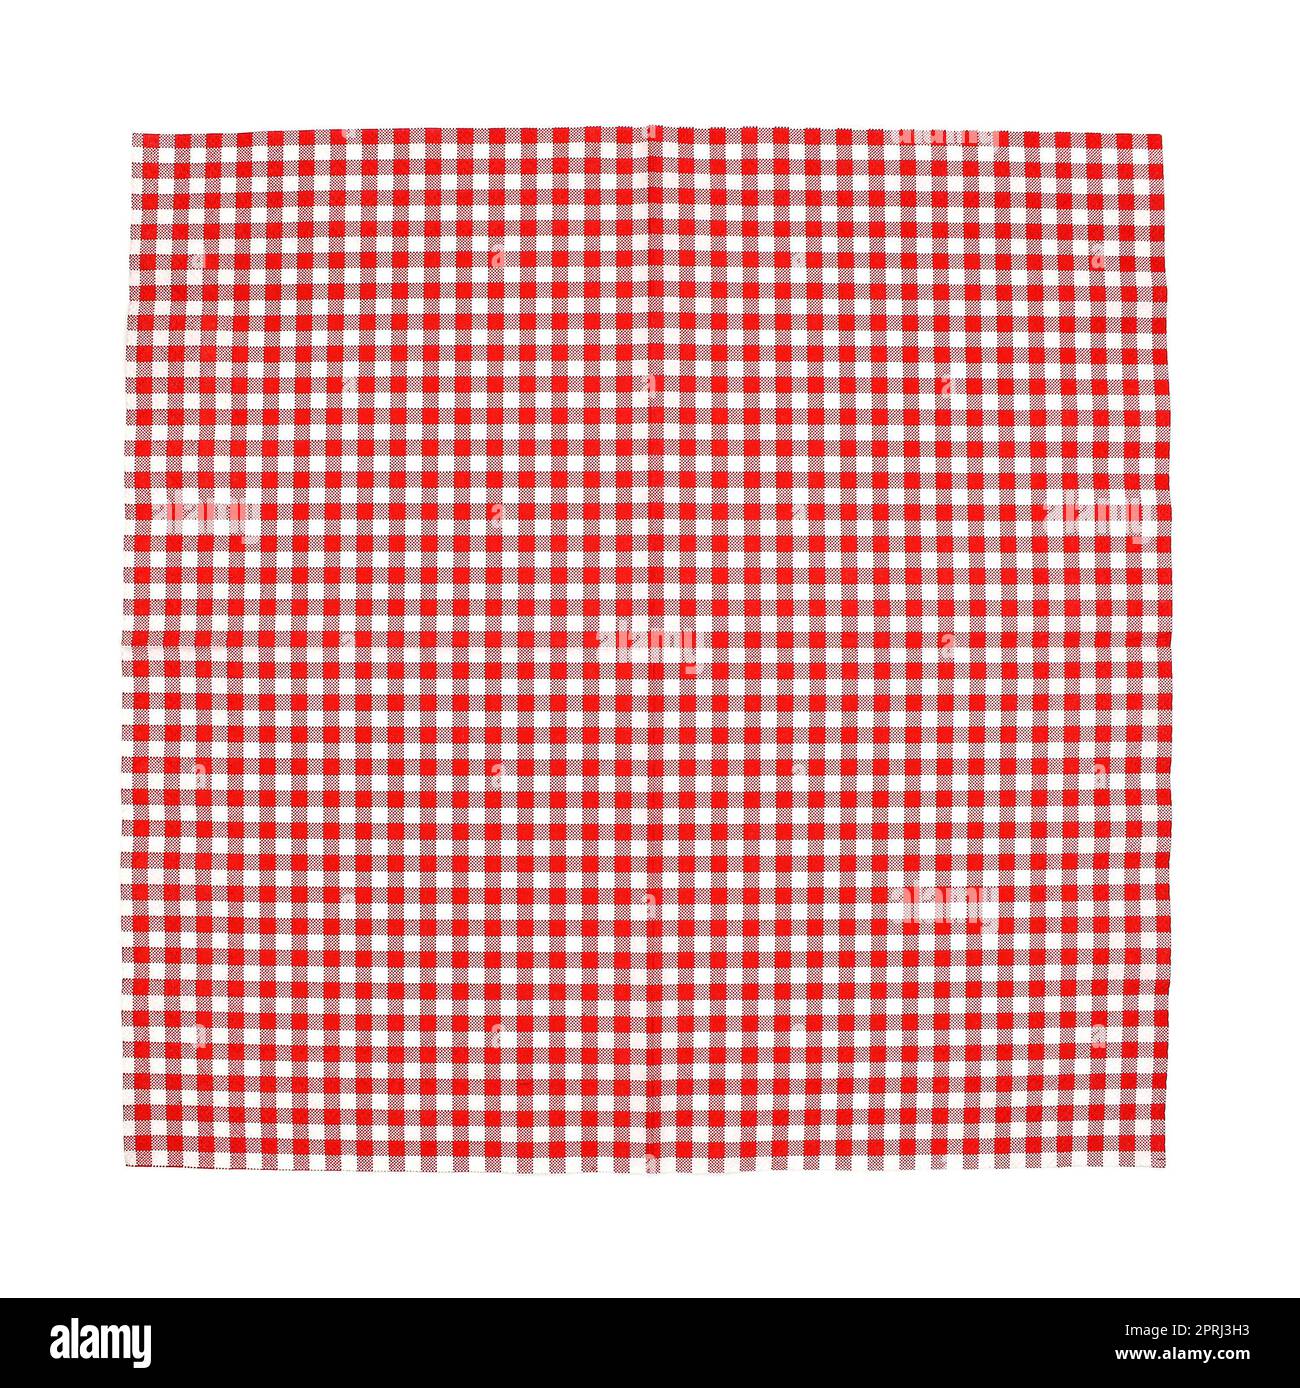 Top view checkered tablecloth pattern Stock Photo